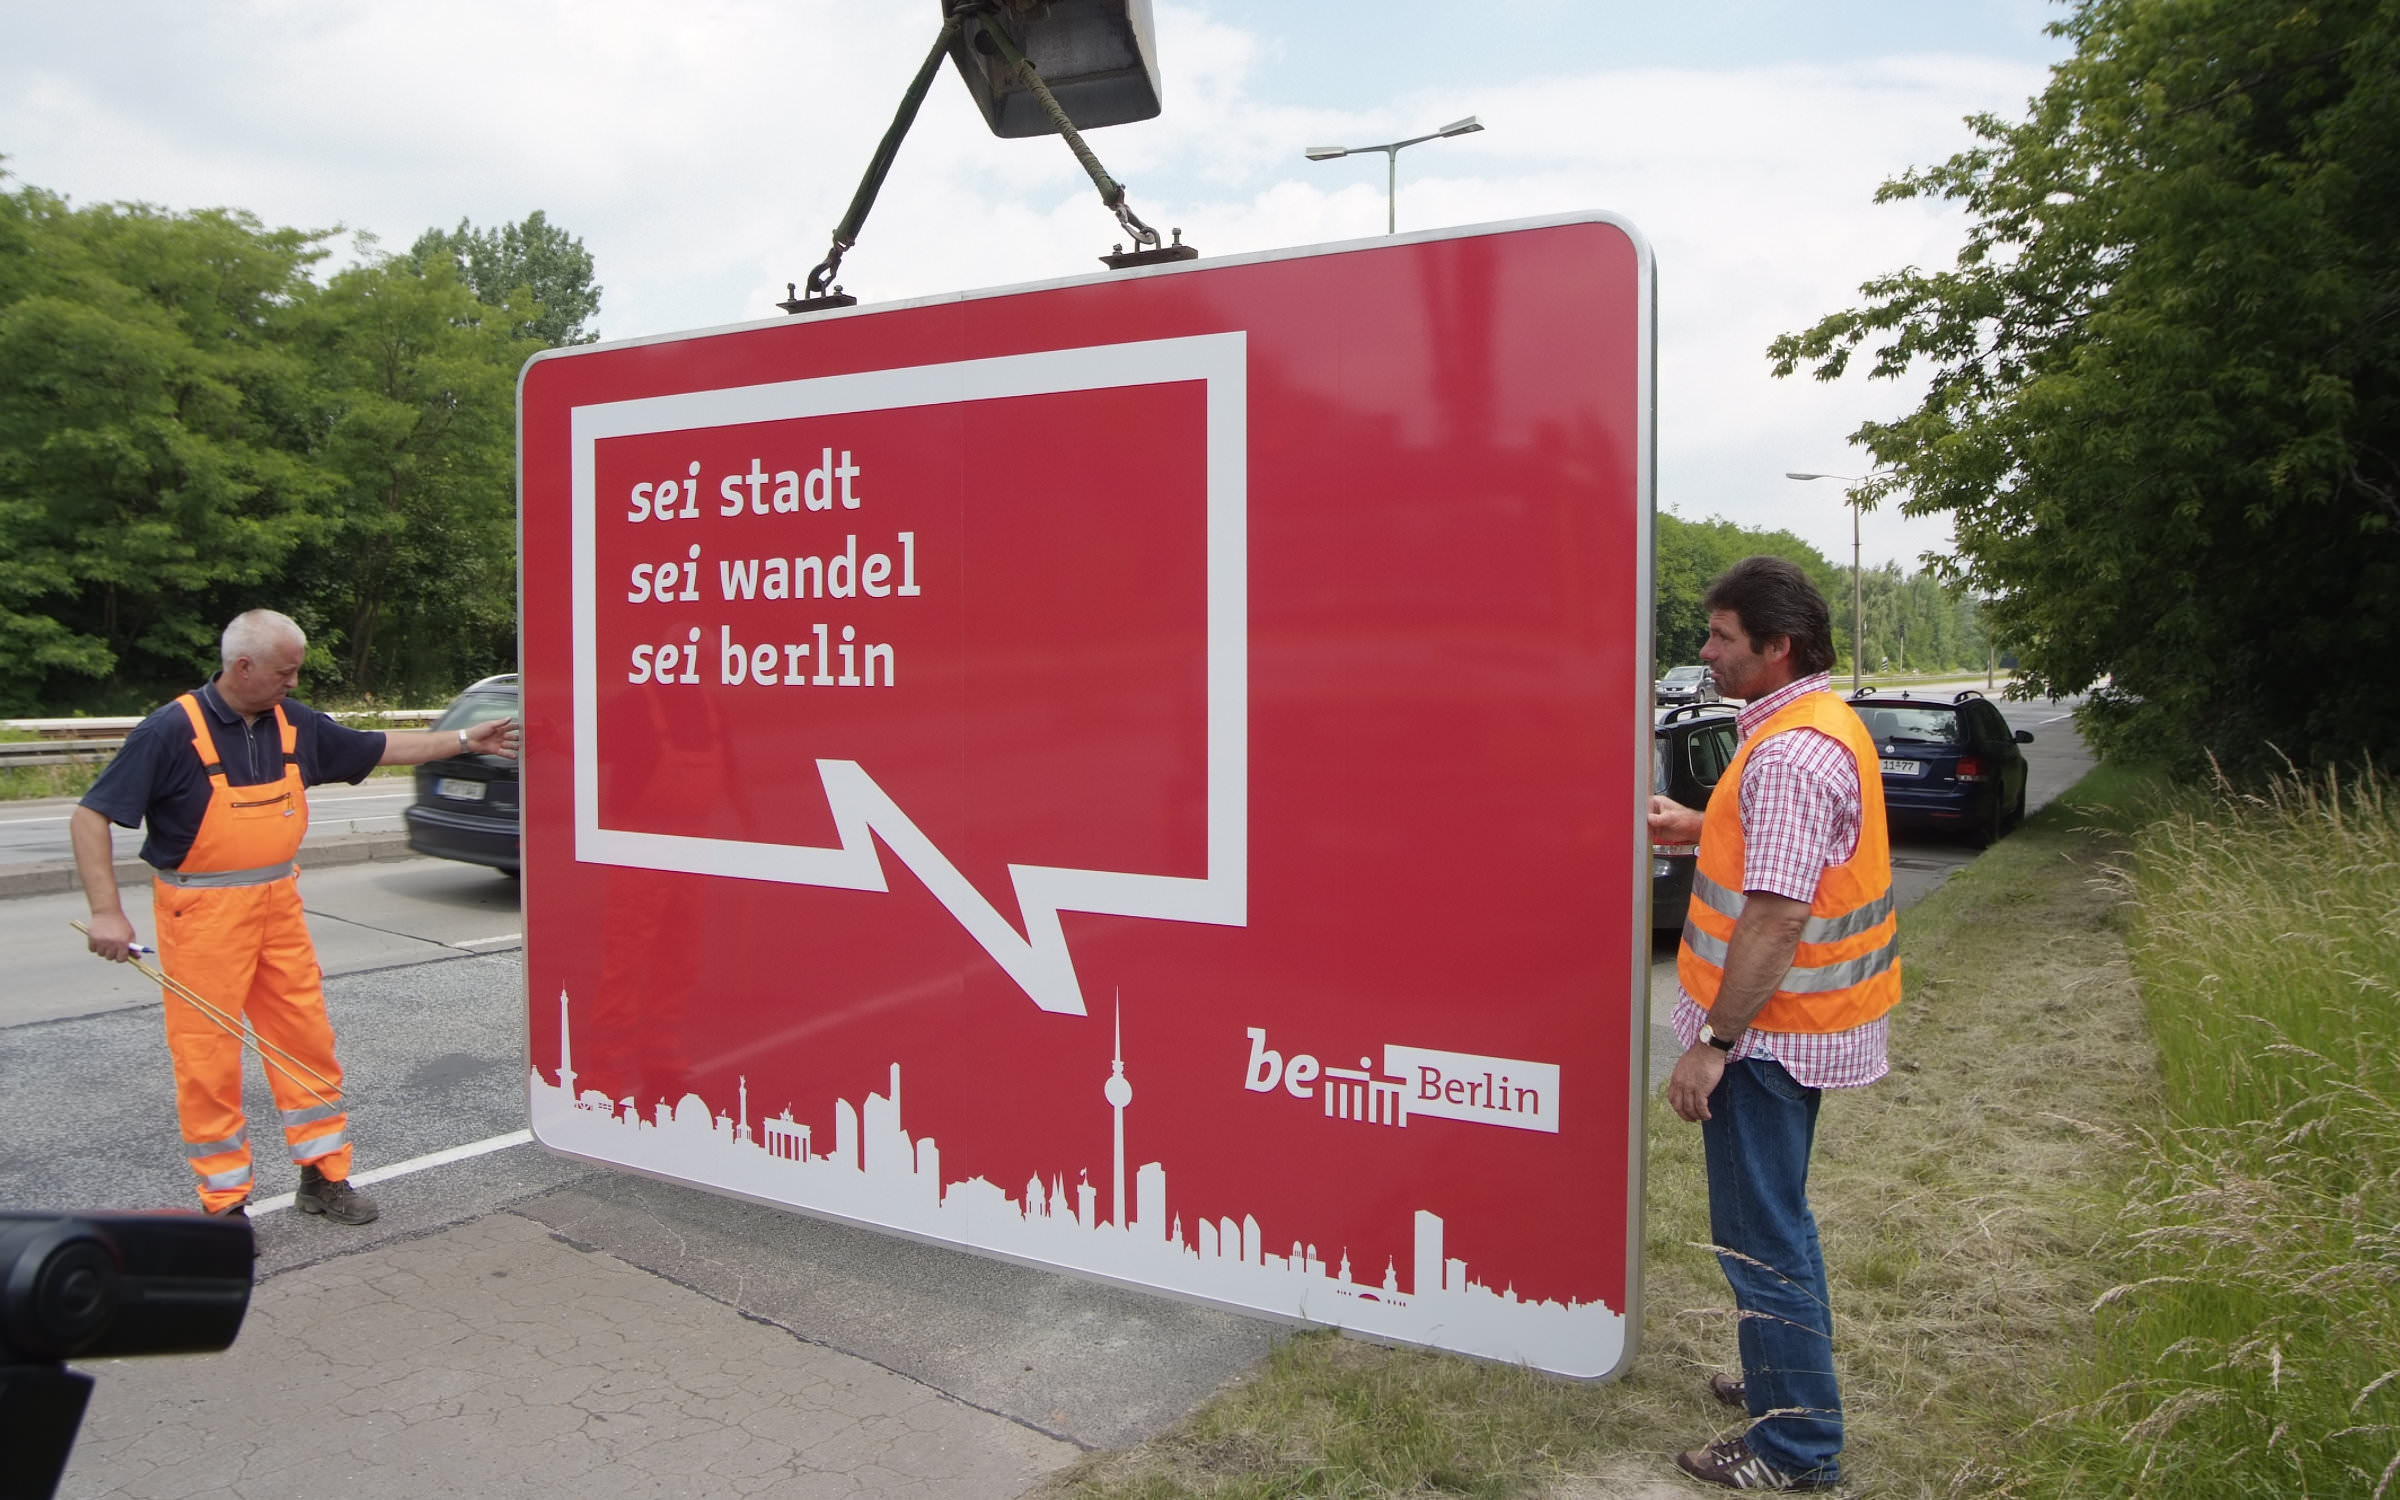 Change Letter (yet unreleased) in use as Berlin’s corporate typeface – Installation sign-board highway